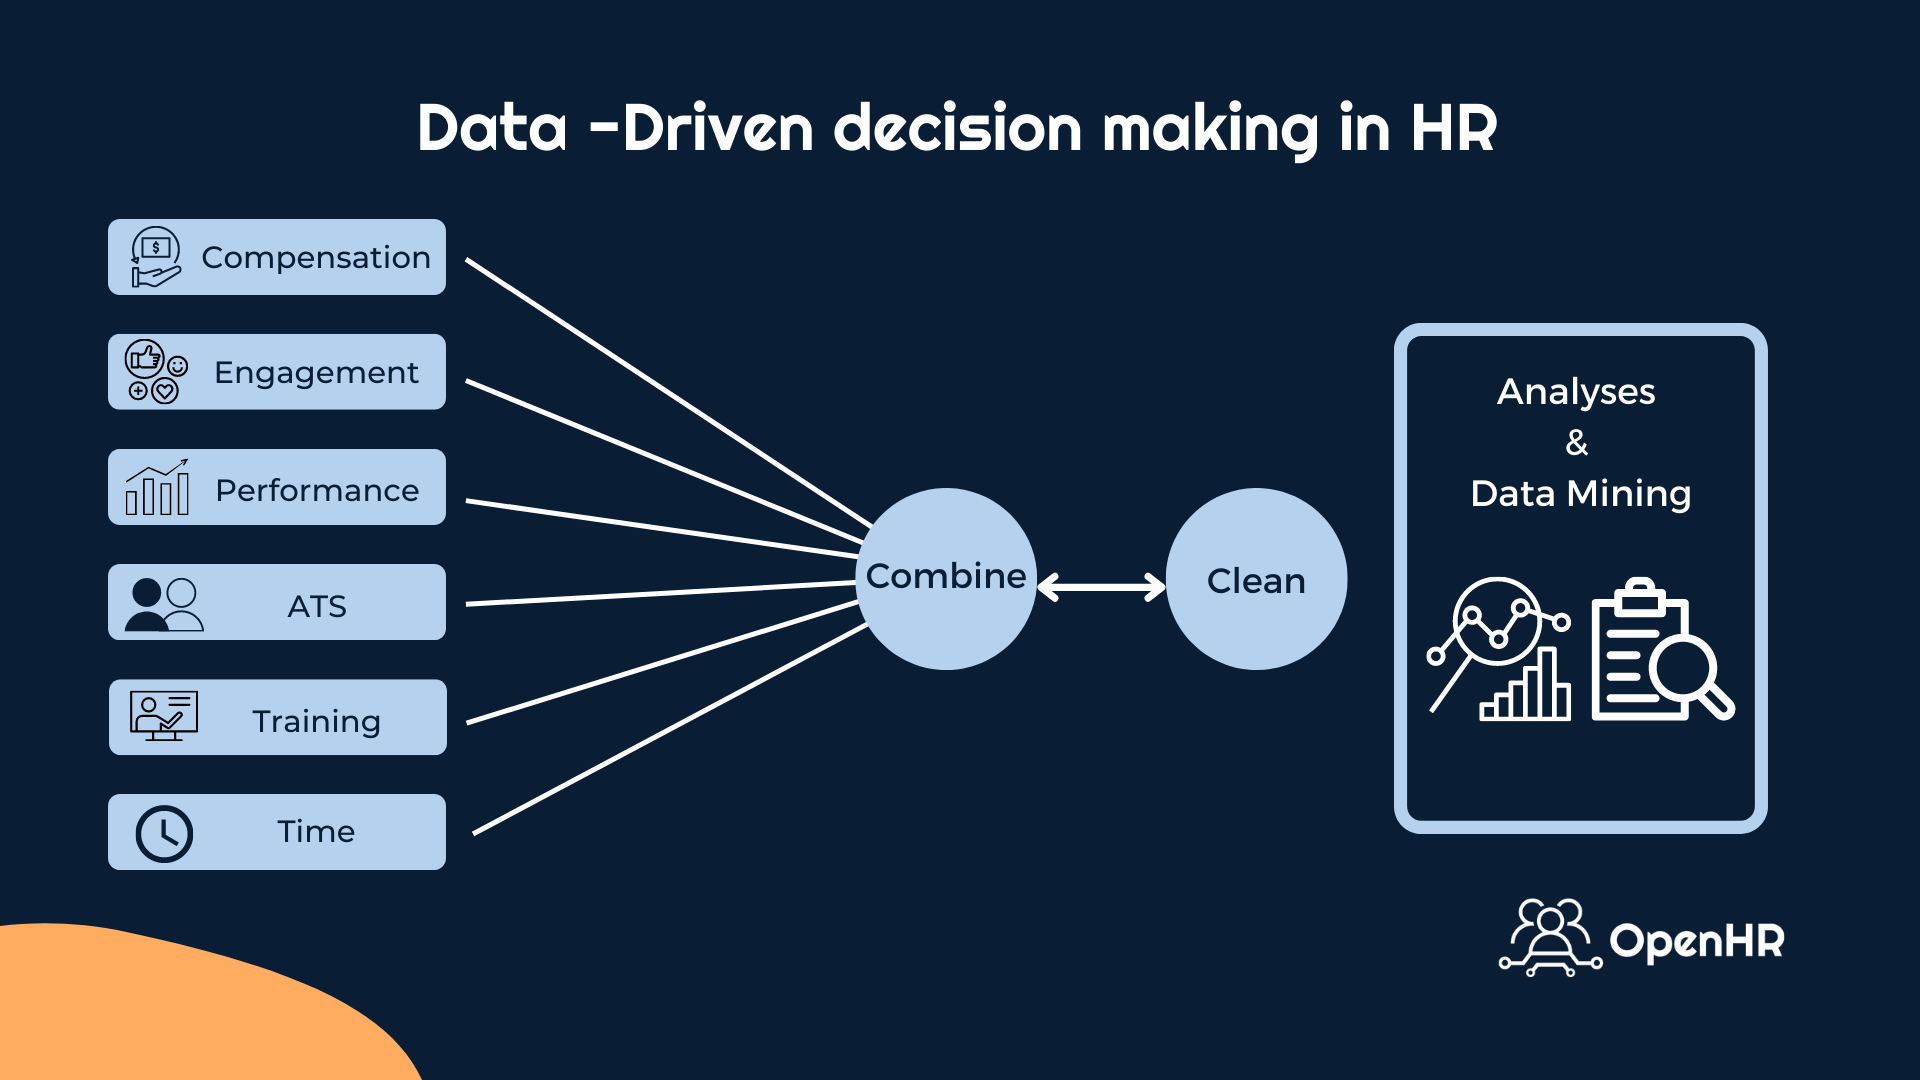 Data-Driven Decision making in HR